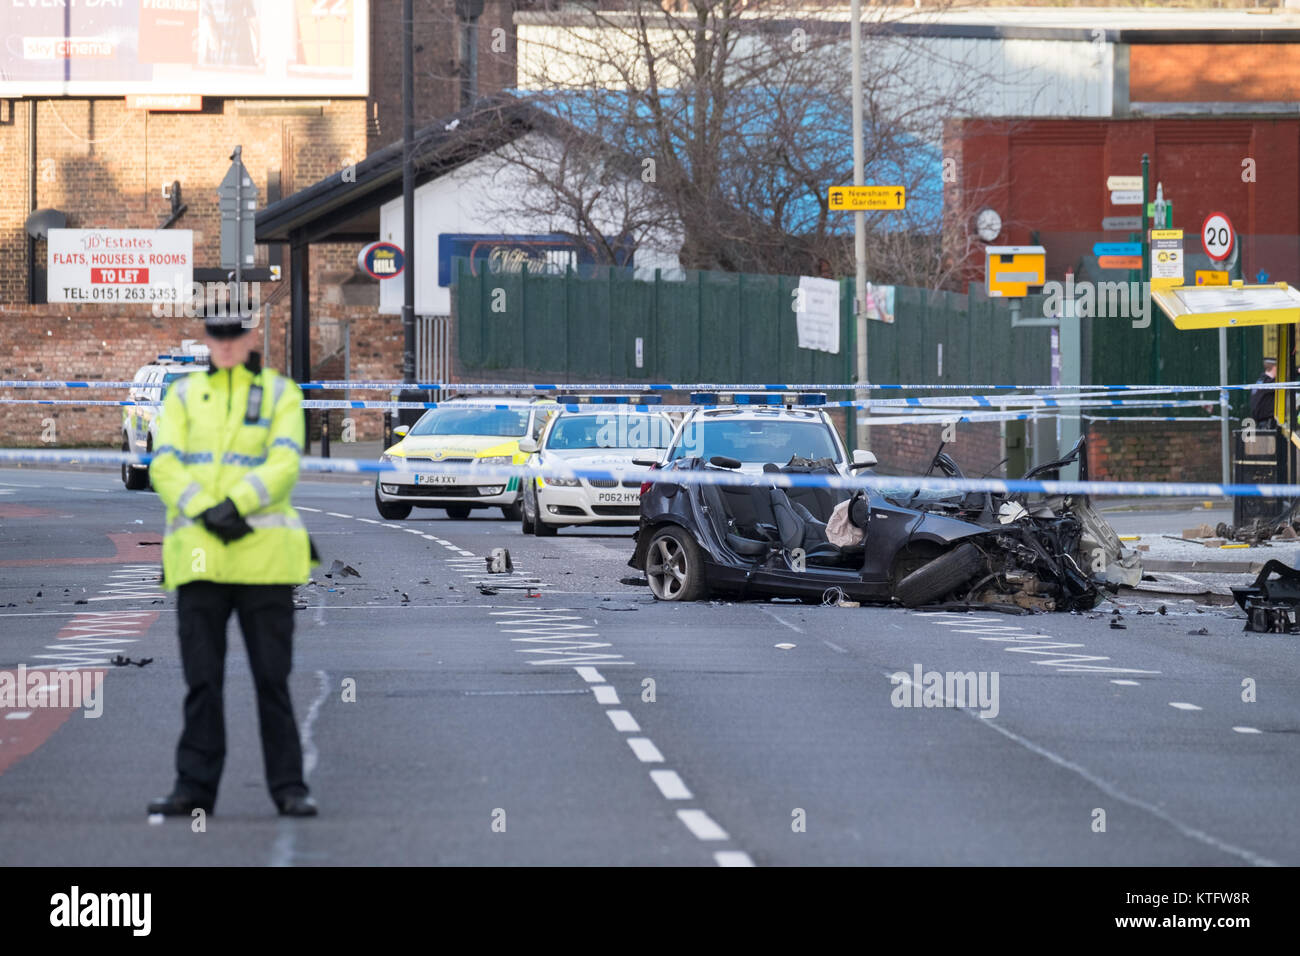 Liverpool, UK. 25 Dec, 2017. A man in his 30s has died after a crash in the early hours of Monday, December 25, 2017. The car was involved in a Police pursuit prior to the crash, which happened at 4:35am on Prescot Road in the Old Swan area of Liverpool. The driver was detained by Police at the scene. The spokesperson for Merseyside Police confirmed that the incident has been referred to the Independent Police Complaints Commission. Credit: Christopher Middleton/Alamy Live News Stock Photo